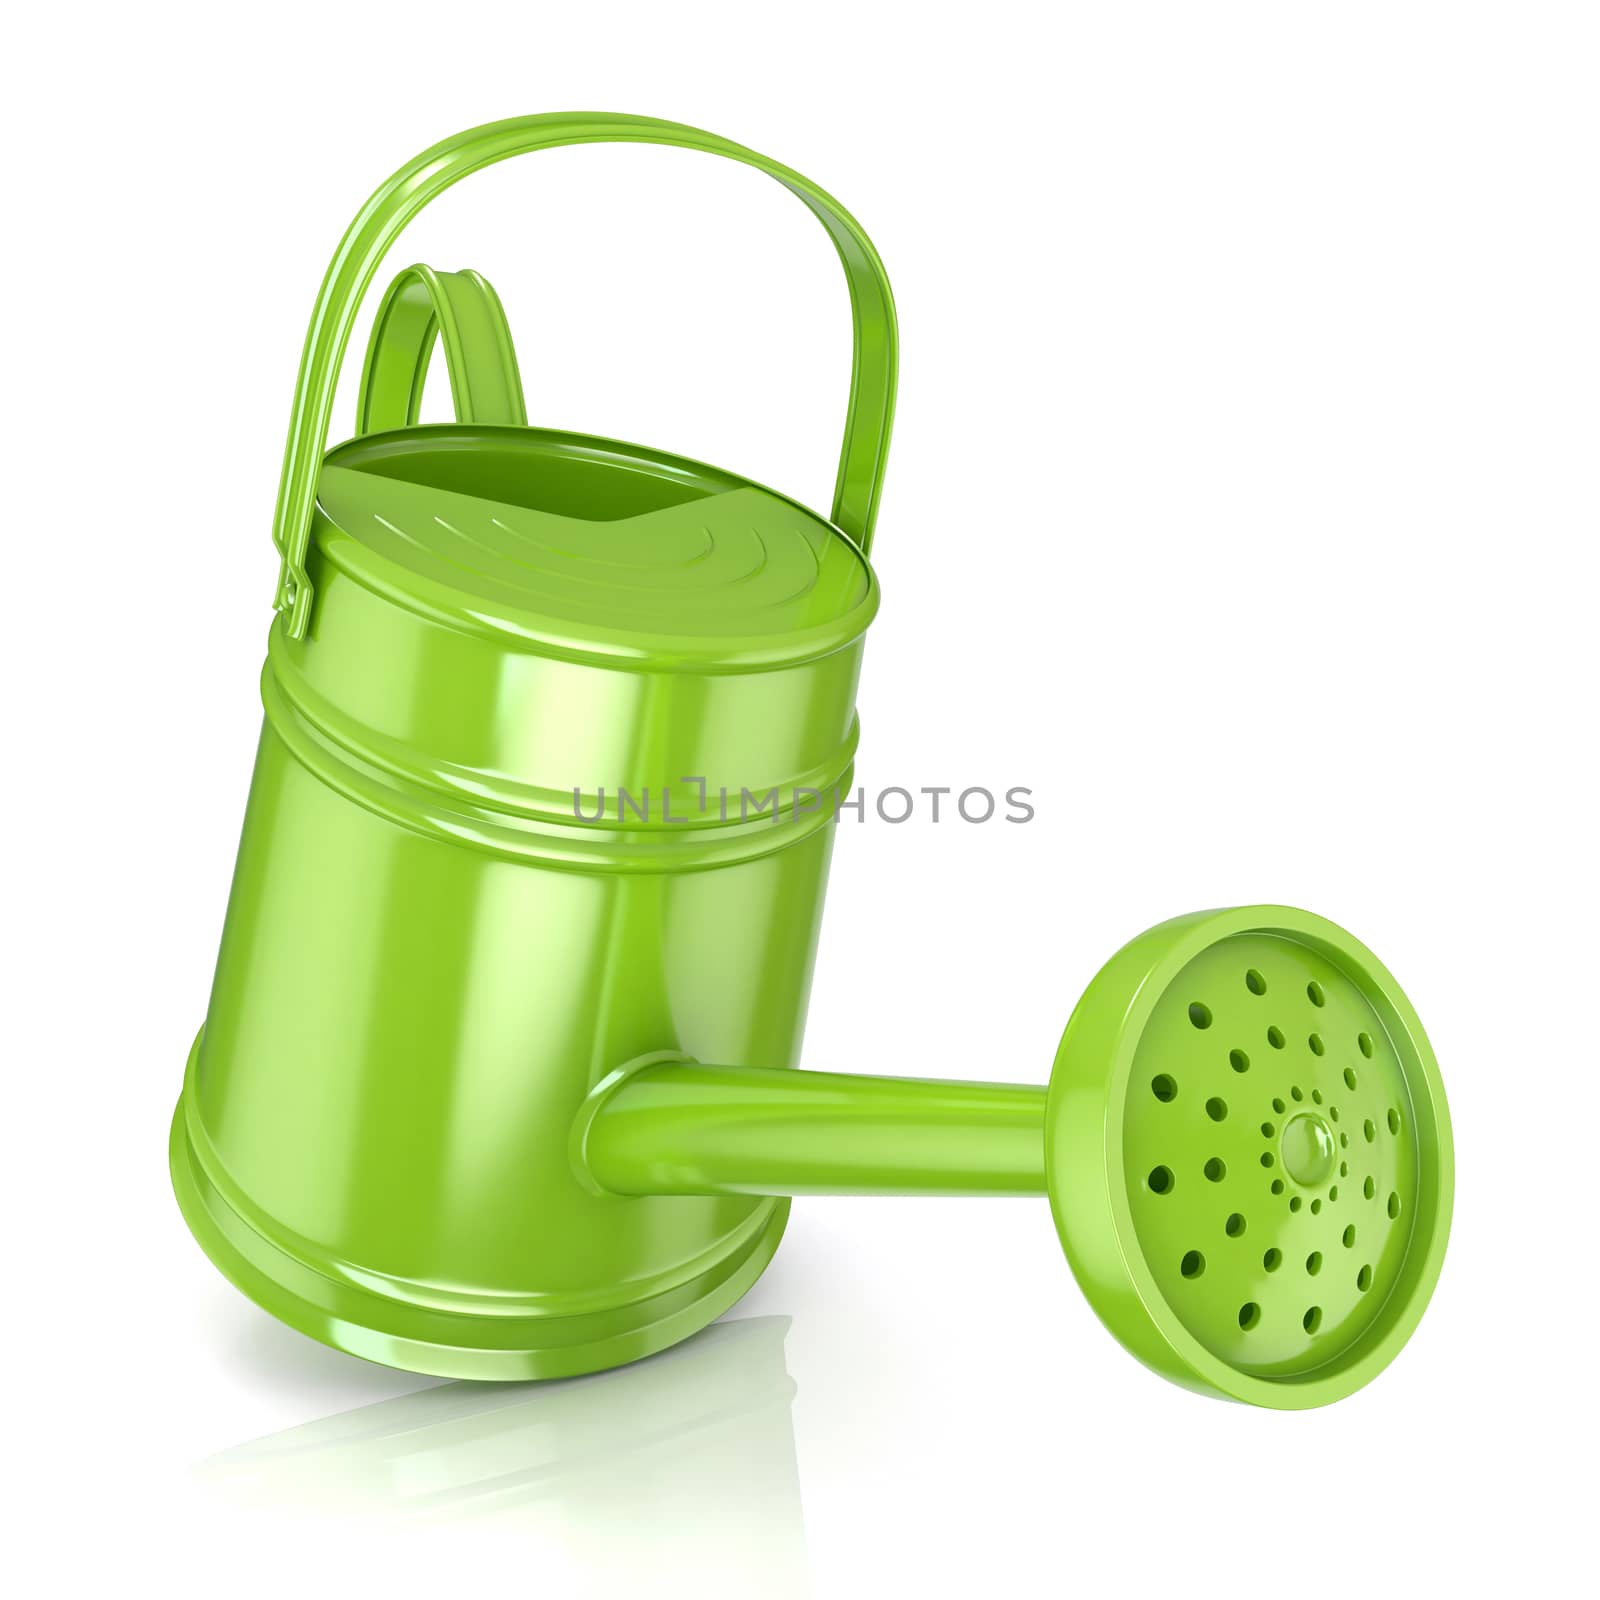 Green watering can 3D render isolated white background. Front view with sprinkler.